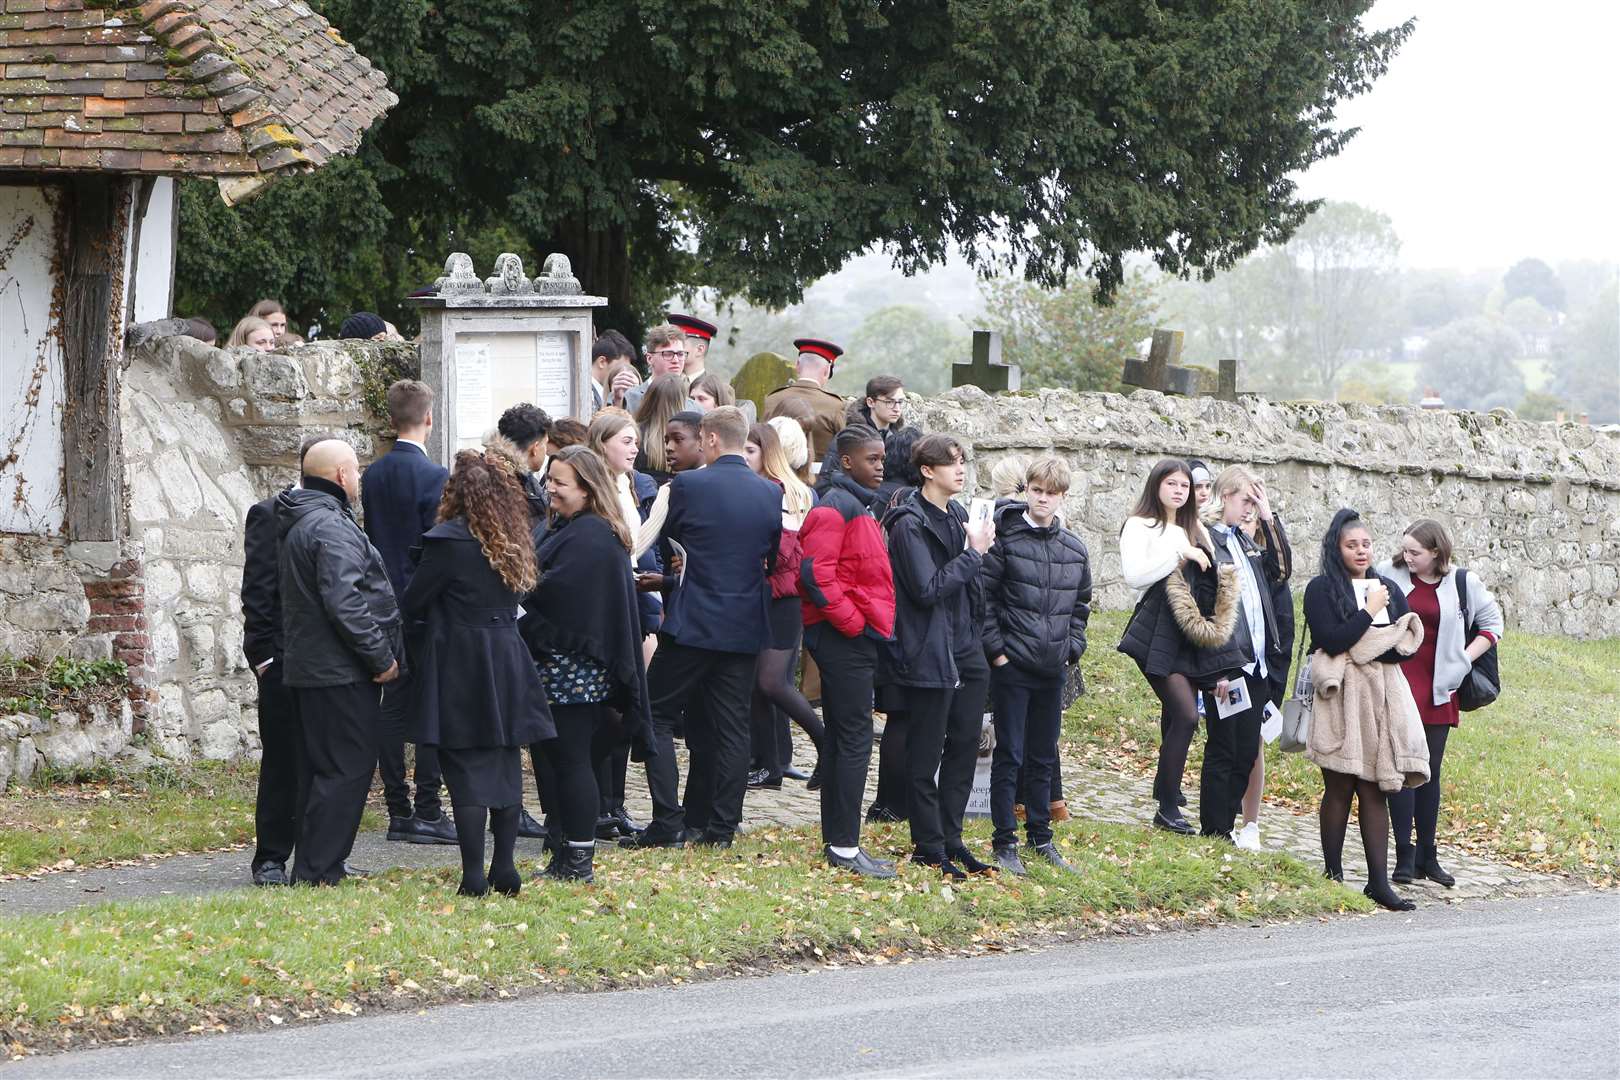 Owen Kinghorn's grandad noted that people of all ages and backgrounds had come to pay their respects.